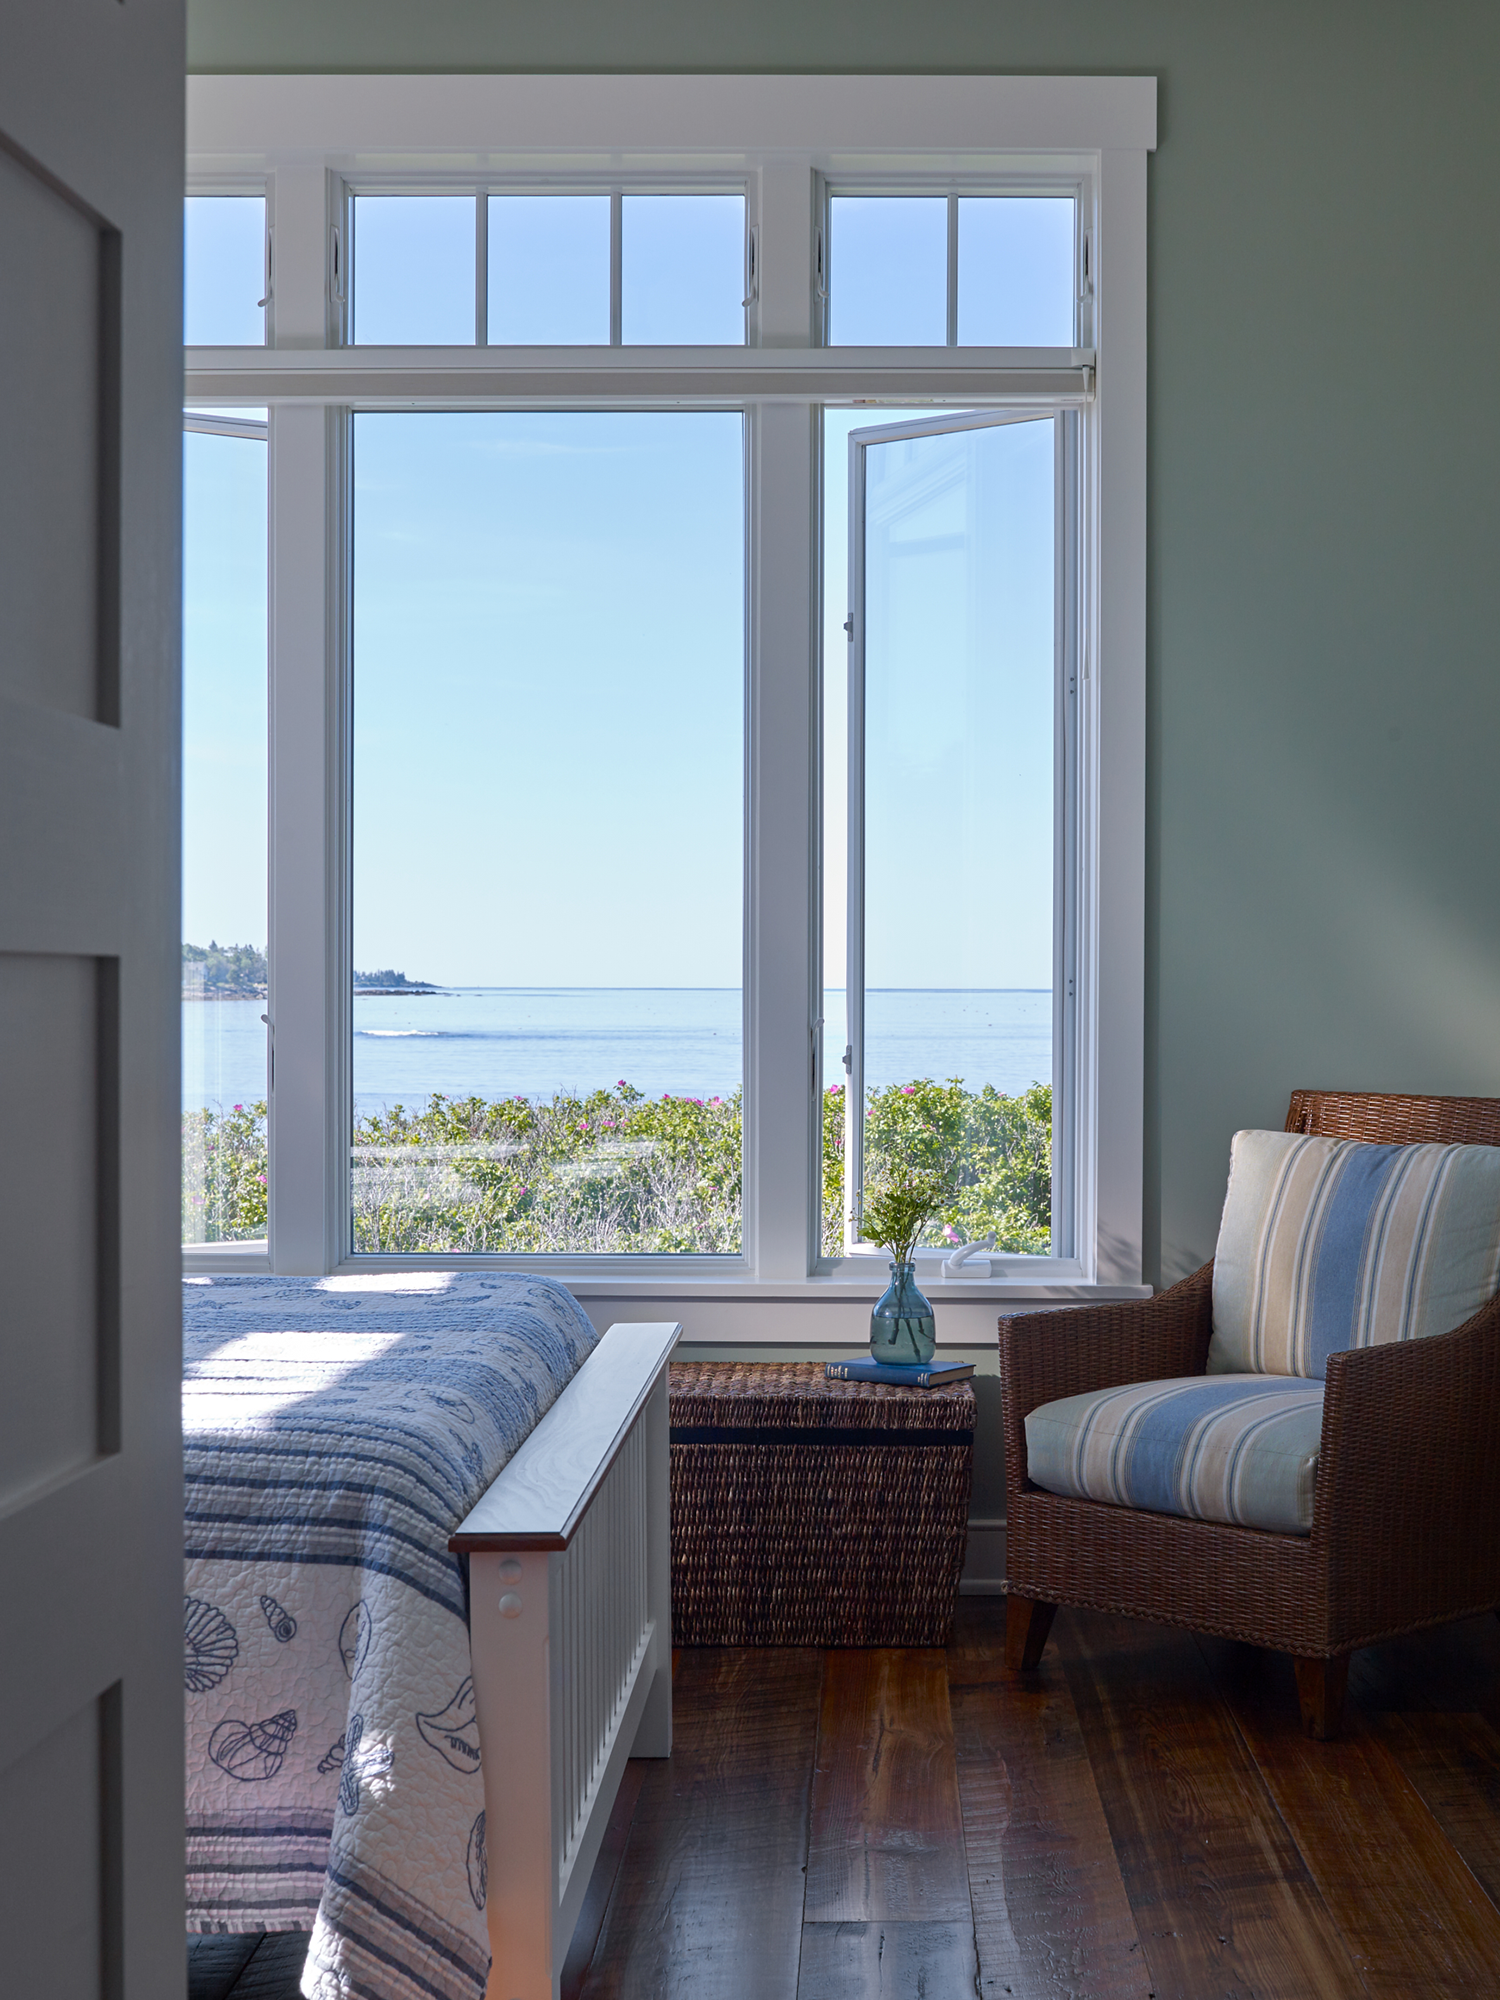 View of bedroom with view of Fish point